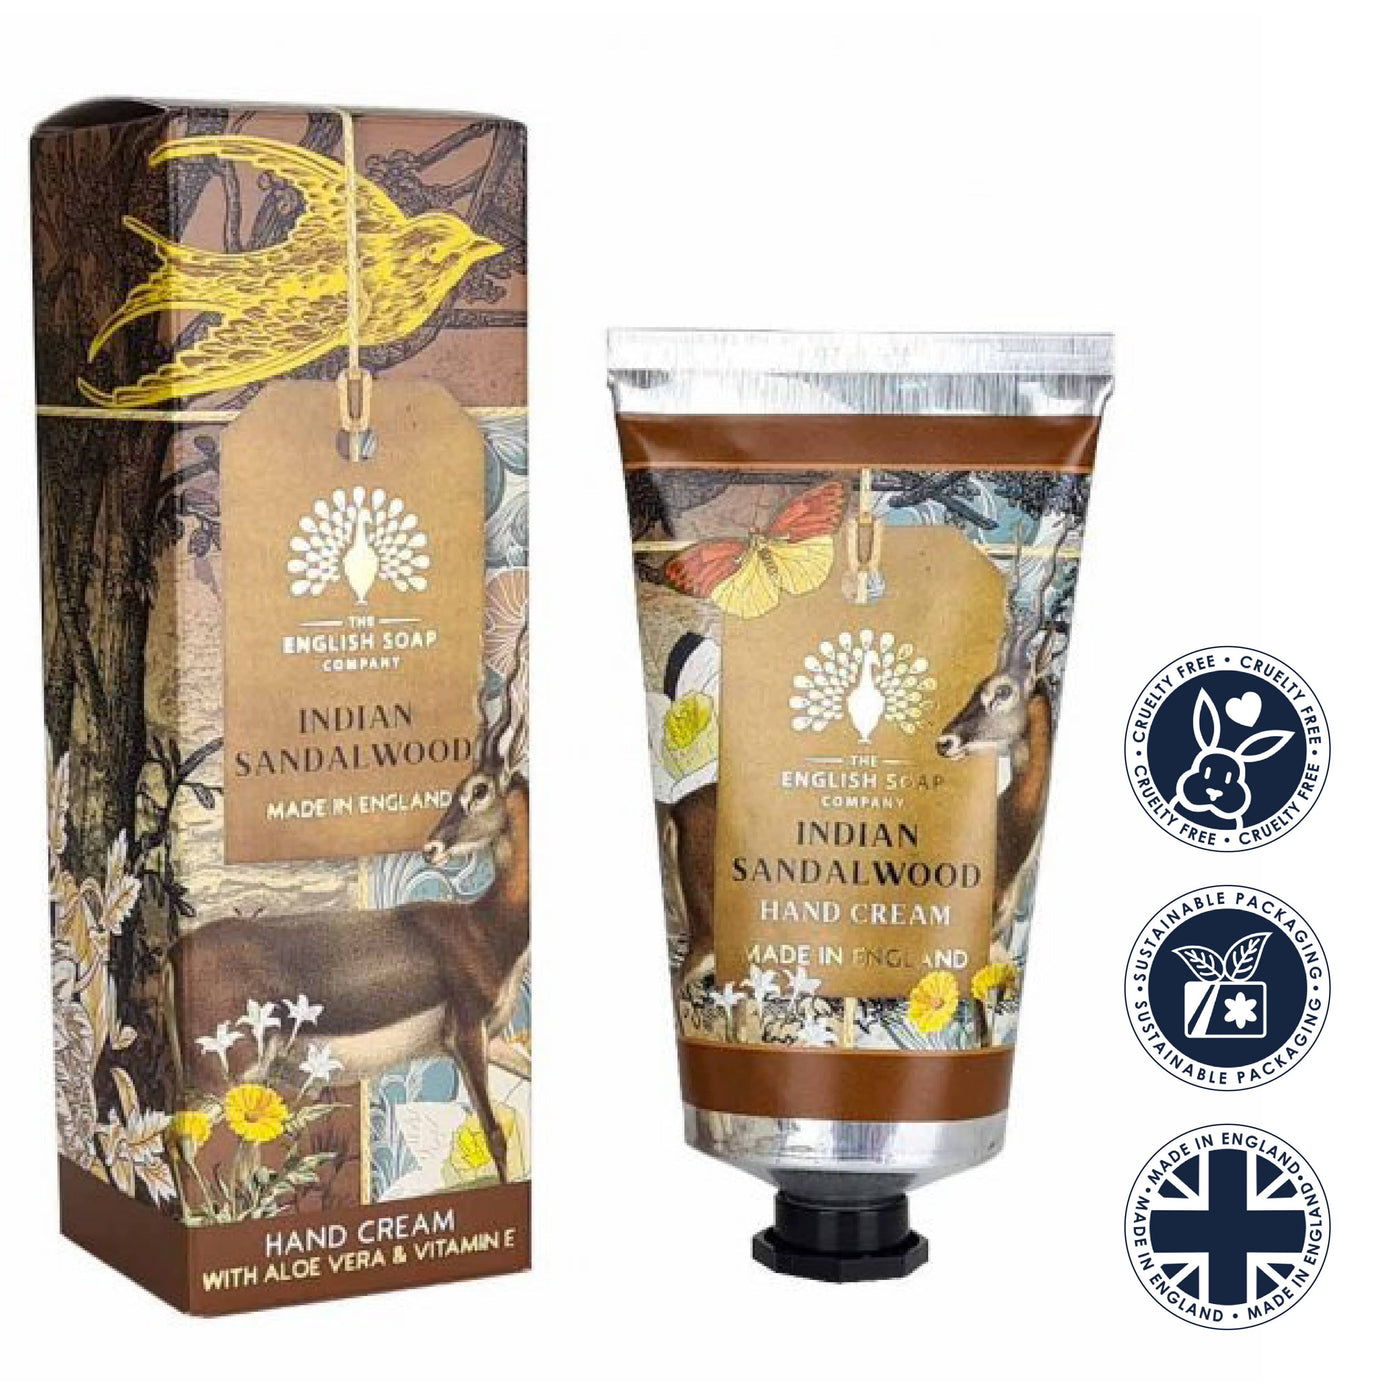 Indian Sandalwood Hand Cream 75ml from our Hand Cream collection by The English Soap Company